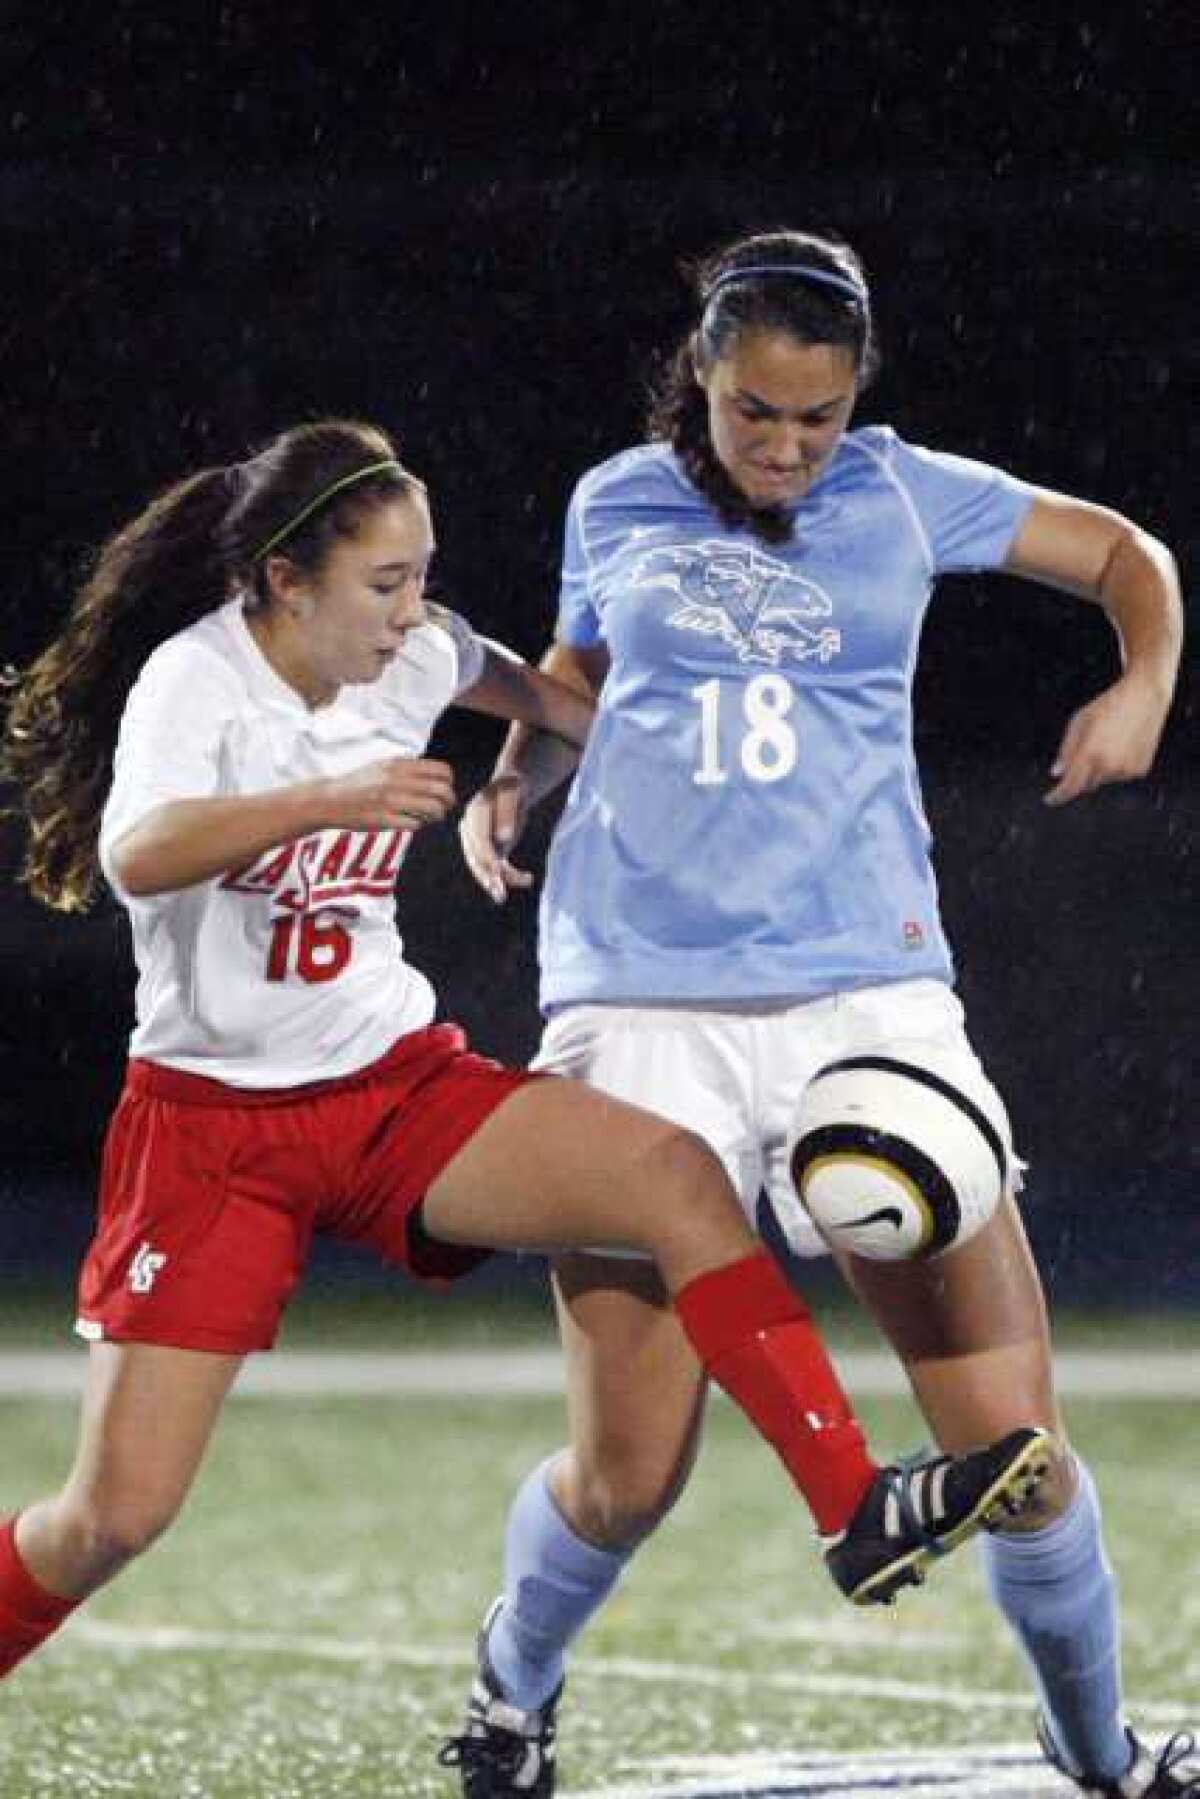 Crescenta Valley senior Katie Callister, right, scored a rebound goal in the first minute of extra time to secure the win for the Falcons.